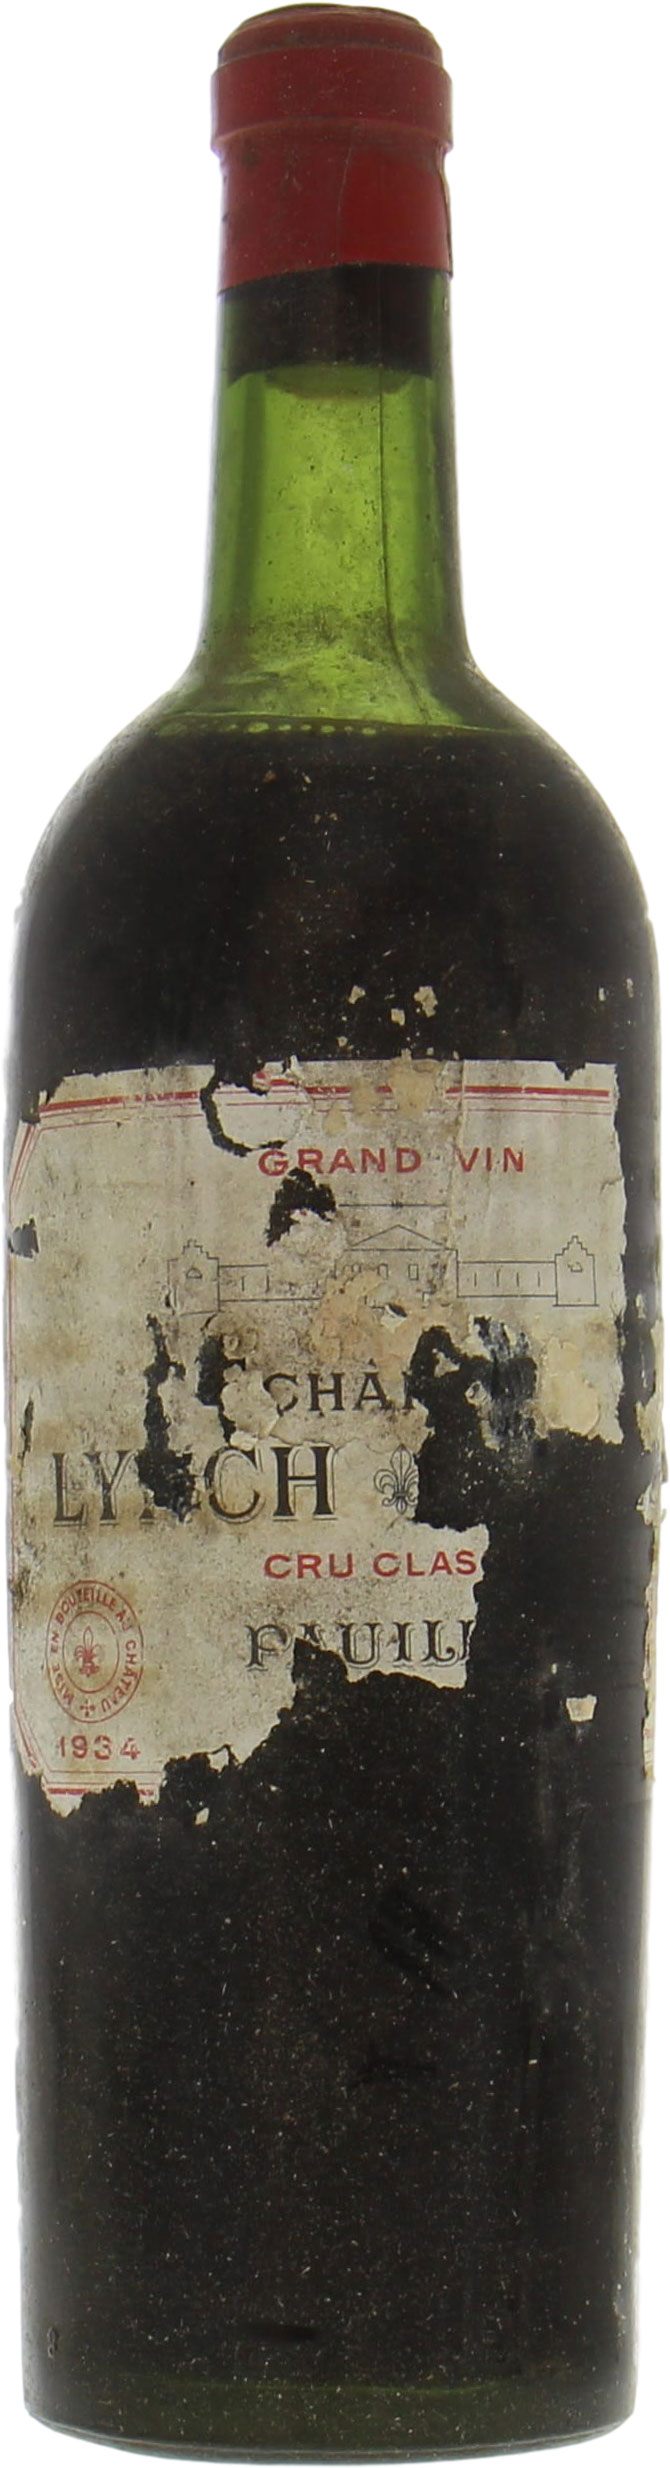 Chateau Lynch Bages - Chateau Lynch Bages 1934